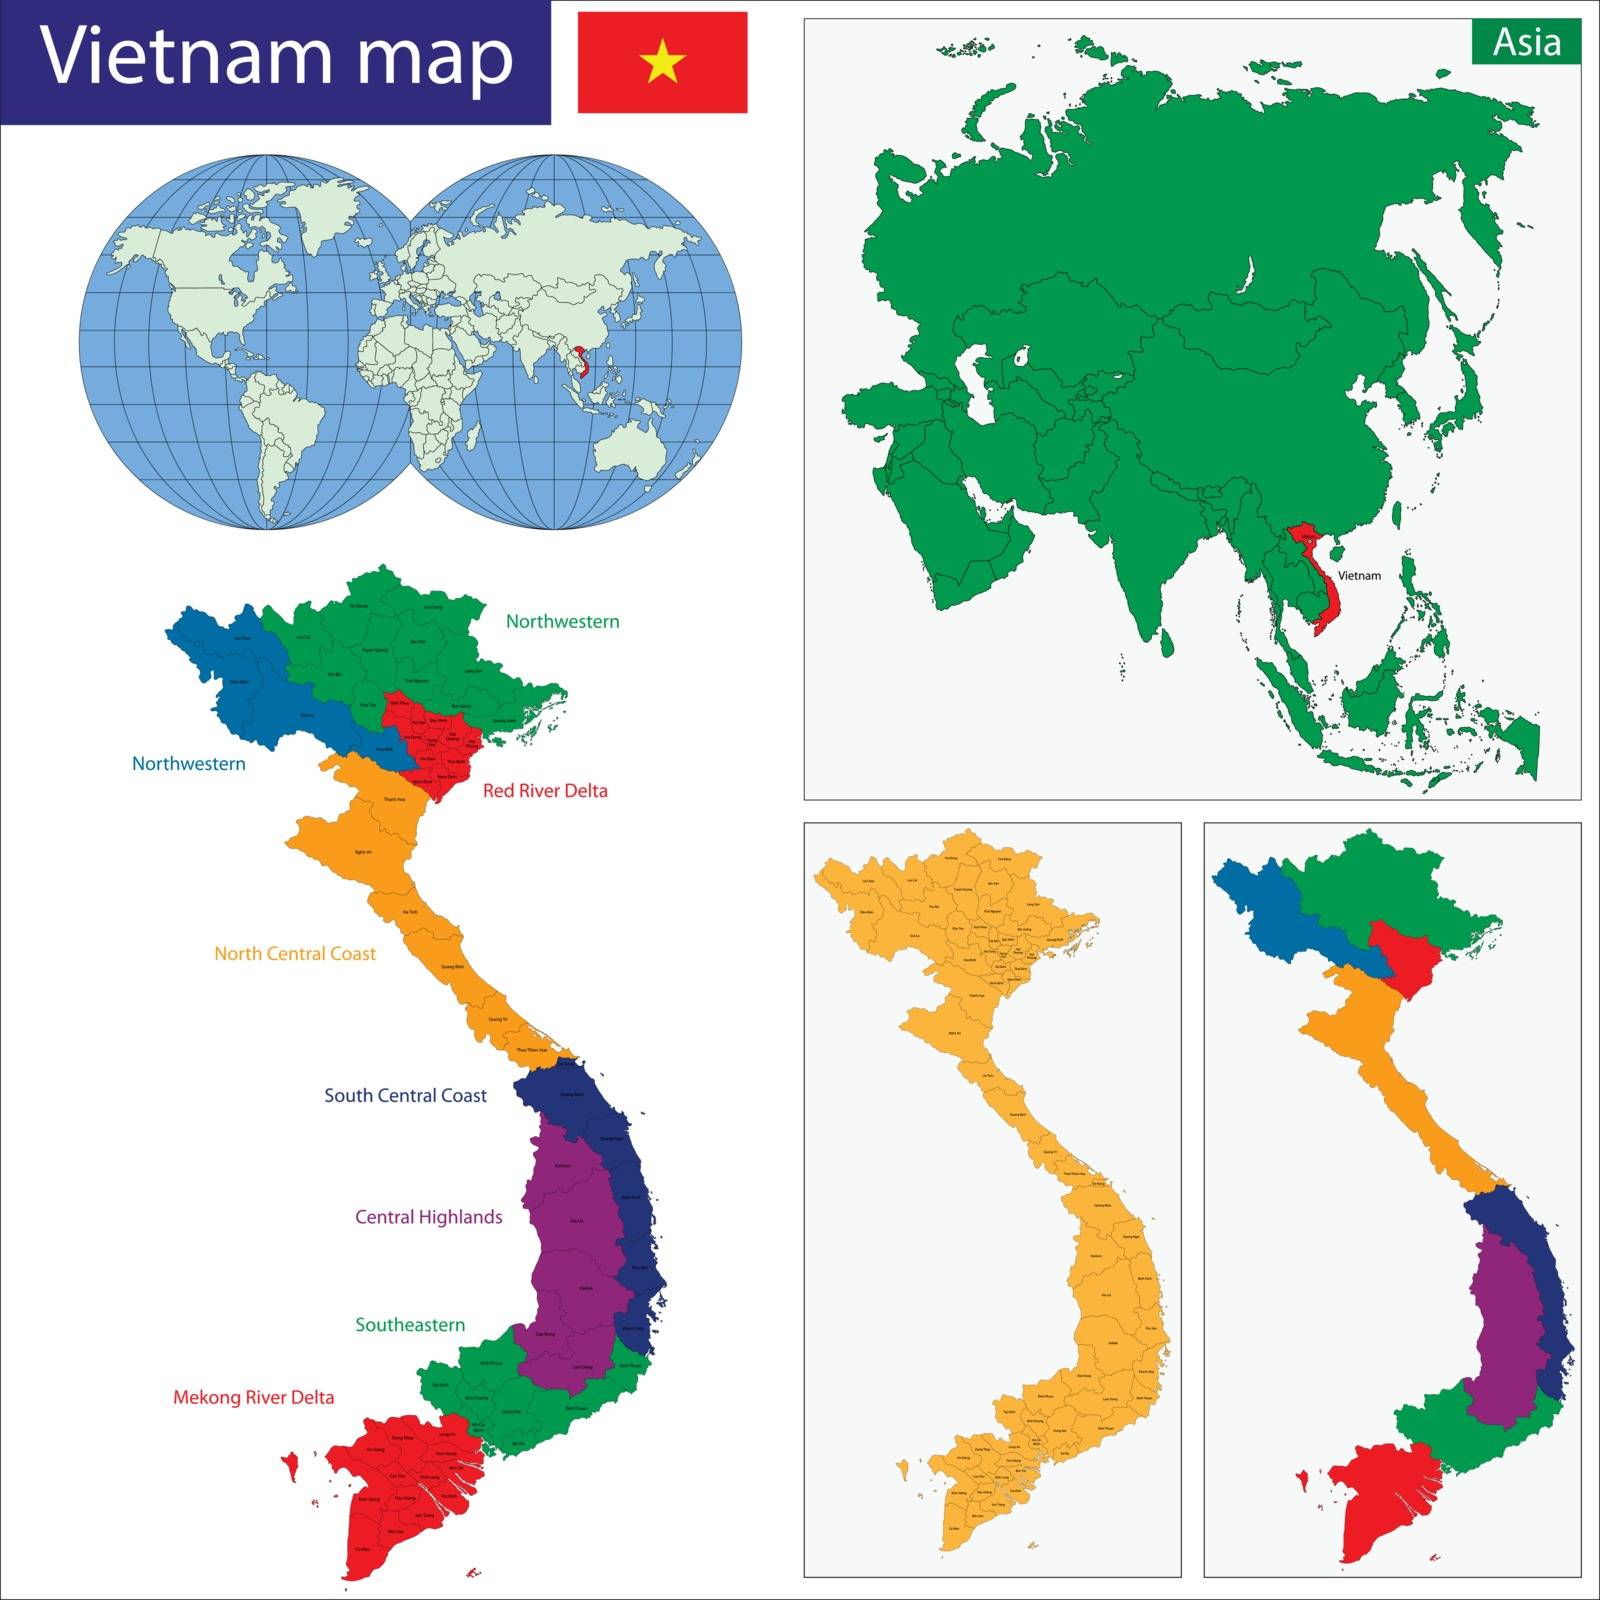 Map of Socialist Republic of Vietnam with the provinces colored in bright colors